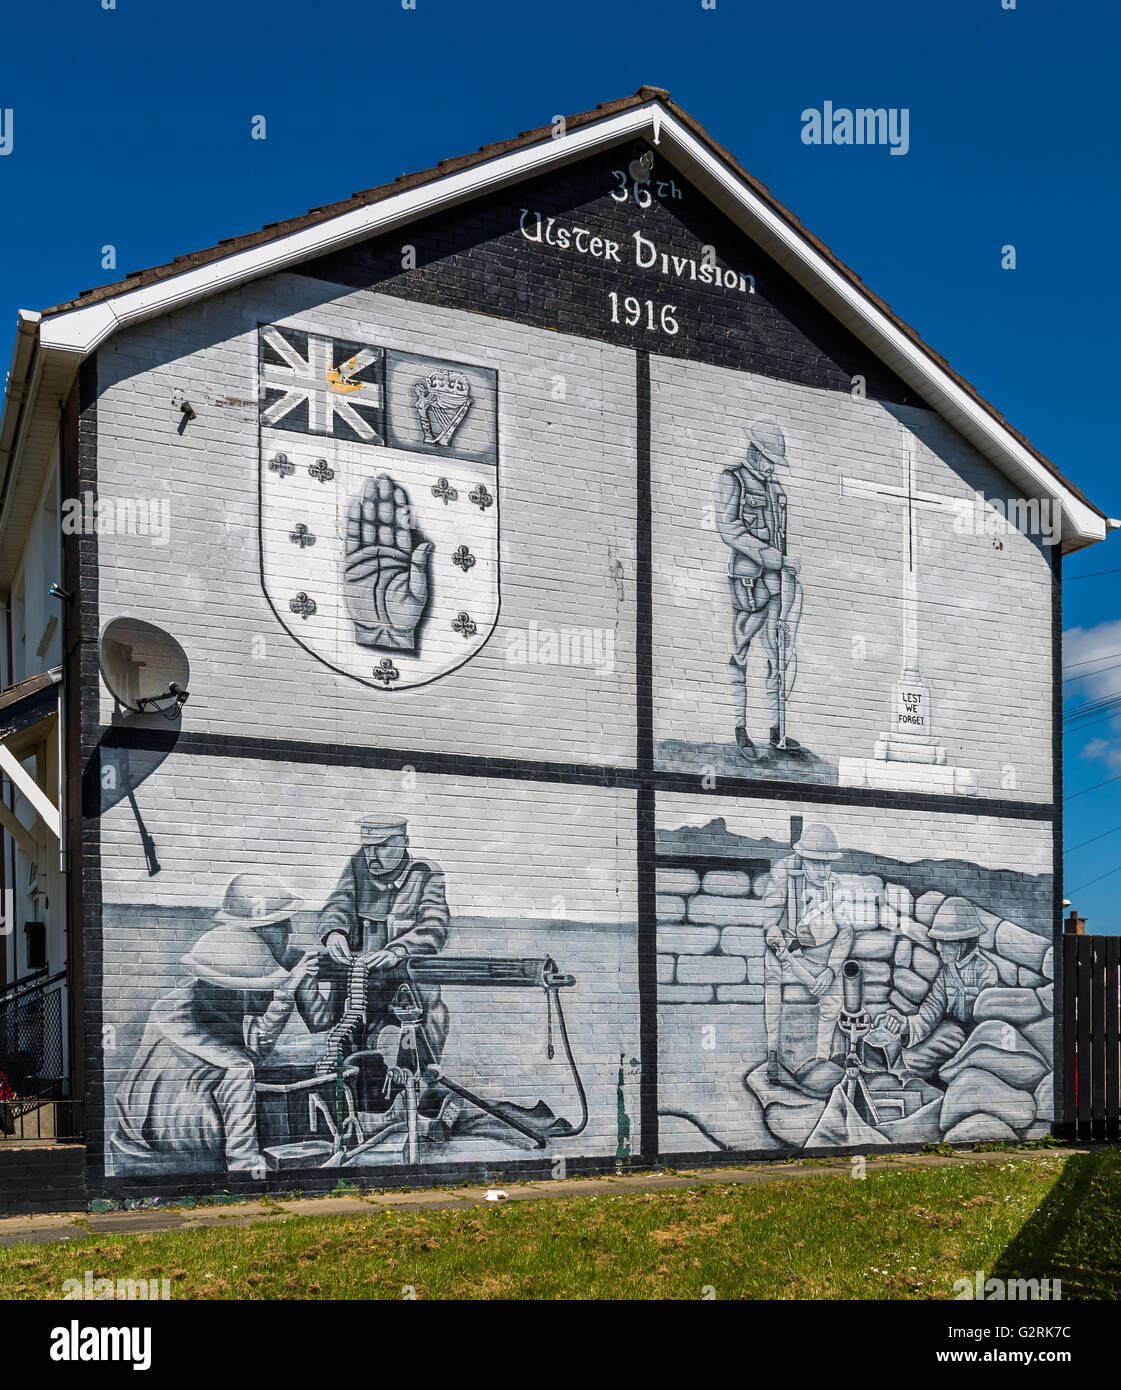 36th Ulster Division mural in loyalist Monkstown estate near Newtownabbey. Stock Photo